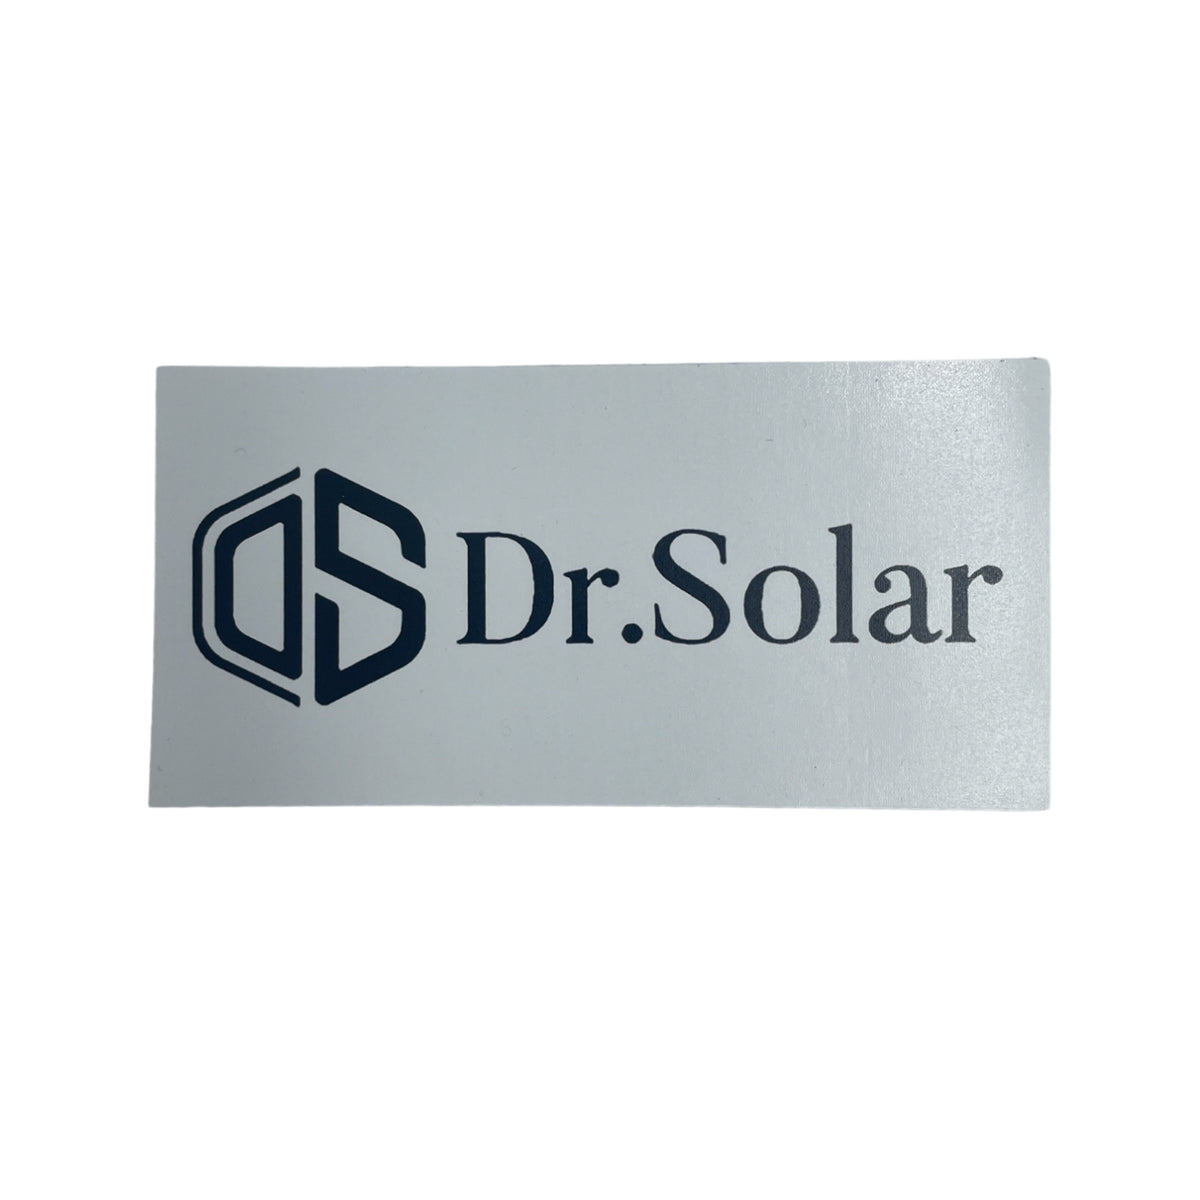 Dr.Solar Logo White Rectangle Sticker for Laptop, Journal, Notesbook, Phone, Computer, Luggage